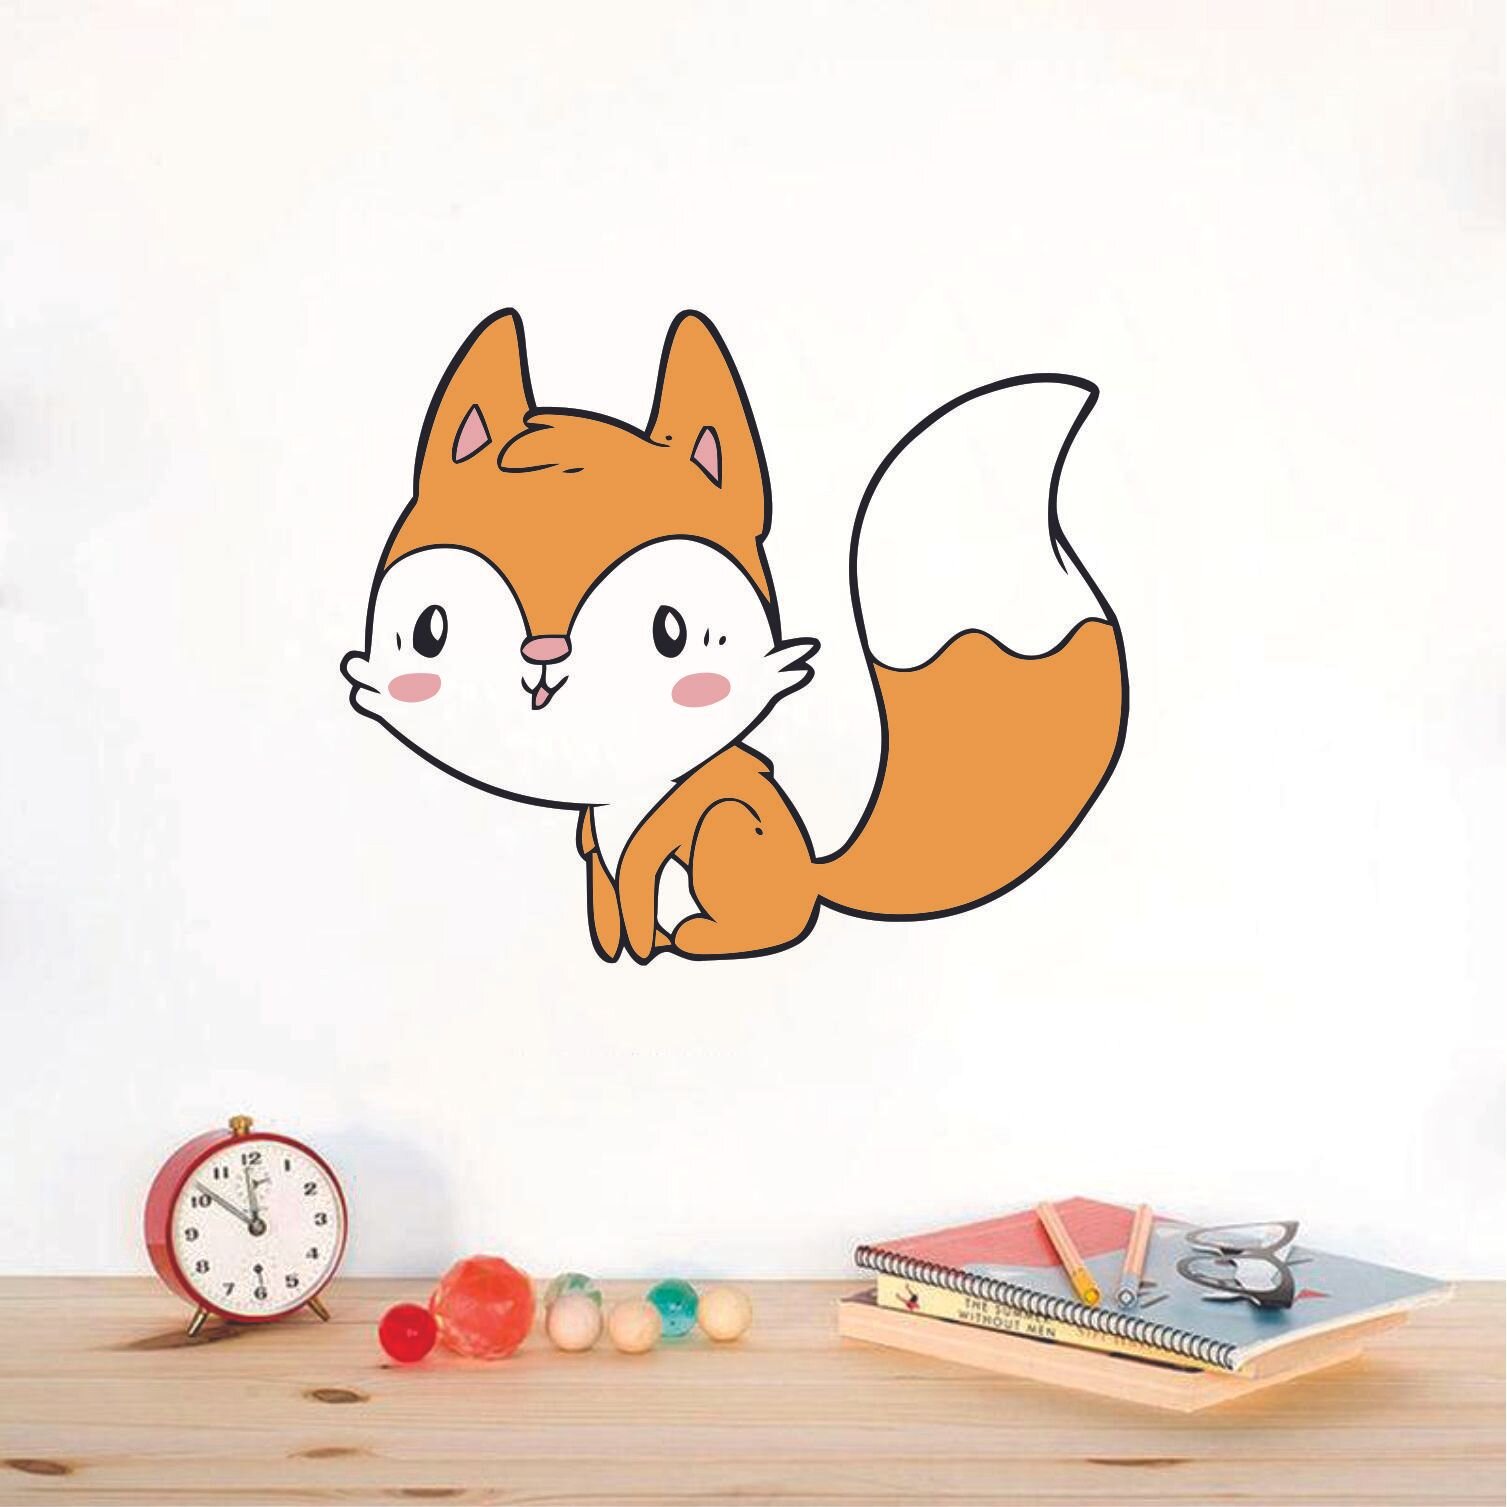 Cute Arctic Fox Clipart Transparent PNG Hd, Cute Fox Cartoon Set Isolated  On White Background Vector Illustration, Fox Drawing, Cartoon Drawing, Fox  Sketch PNG Image For Free Download